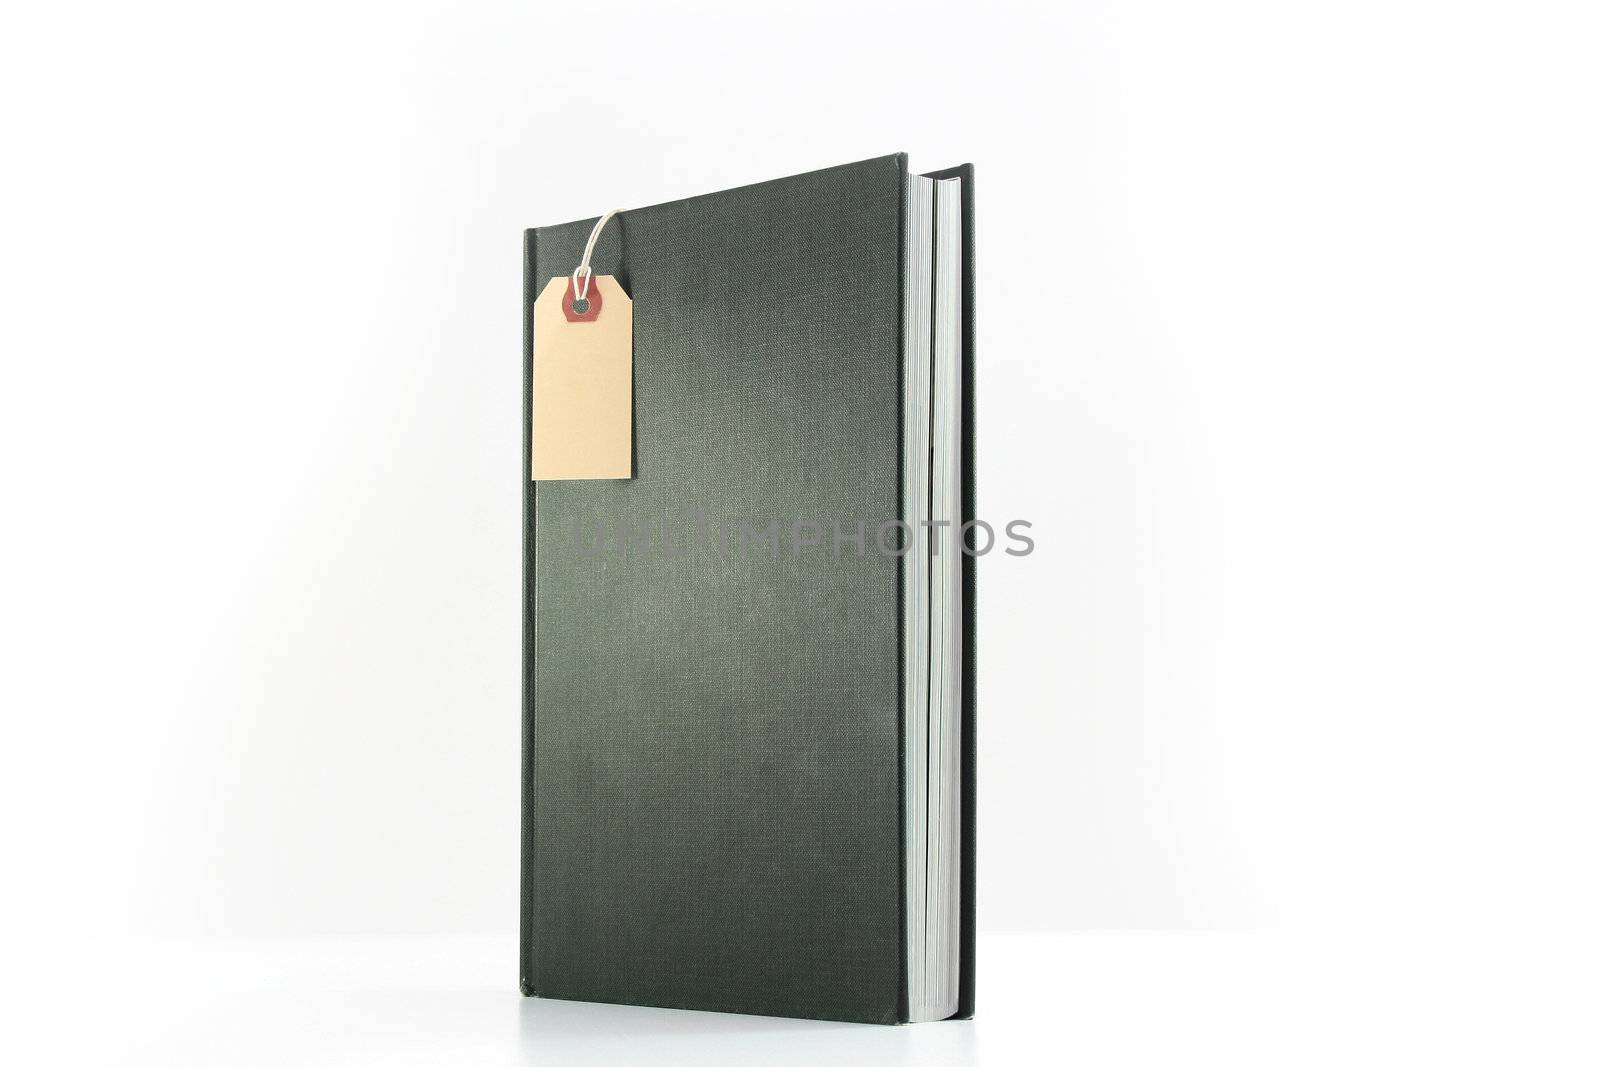 The book costs on a white background, in the book foreground the label hangs.